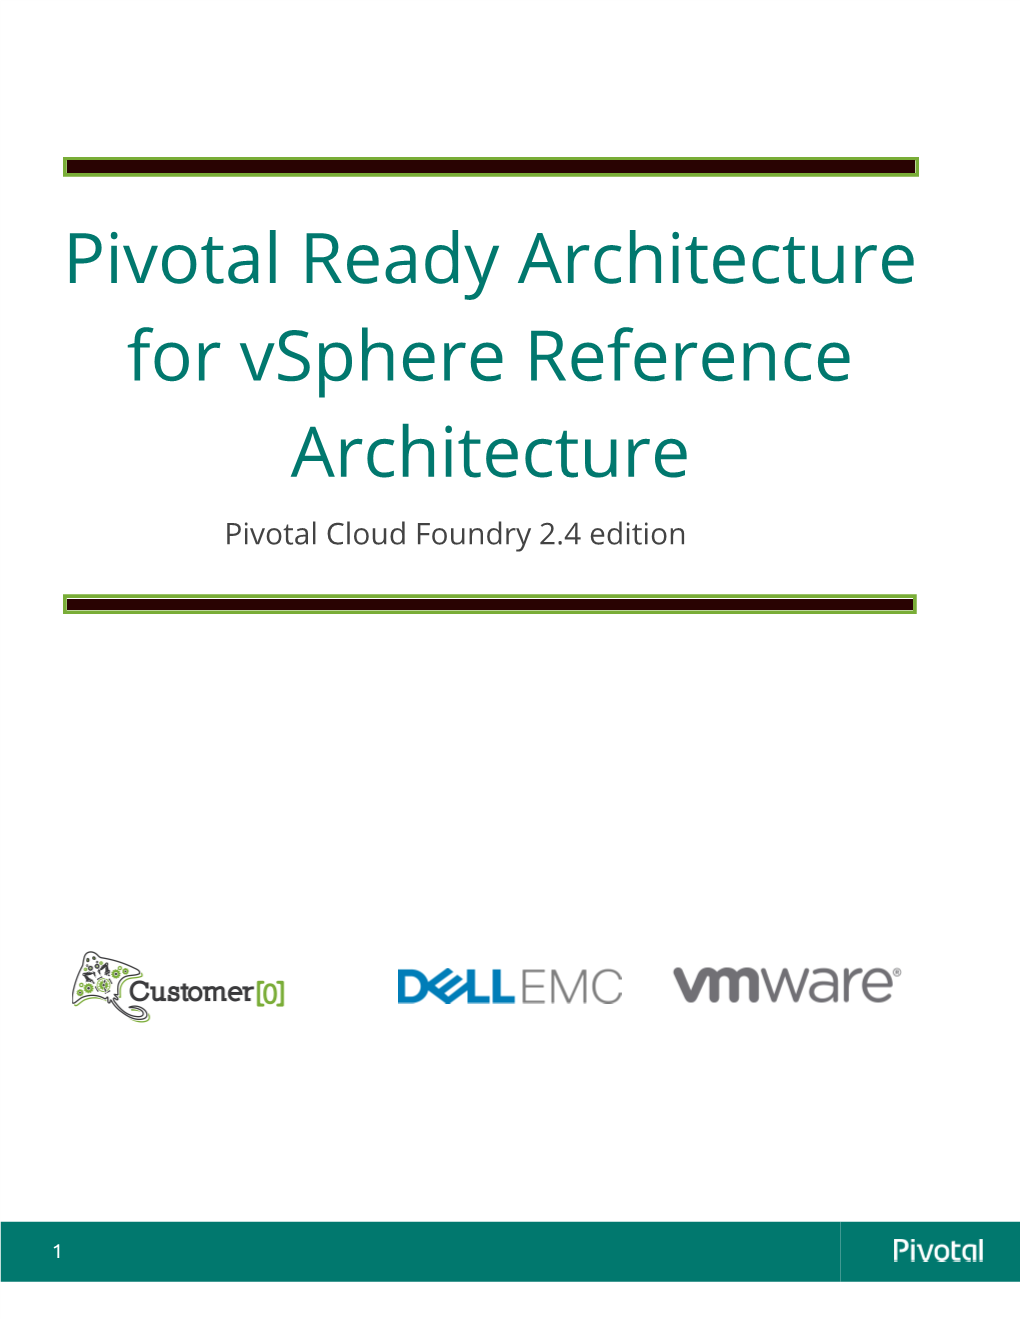 Pivotal Ready Architecture for Vsphere Reference Architecture Pivotal Cloud Foundry 2.4 Edition